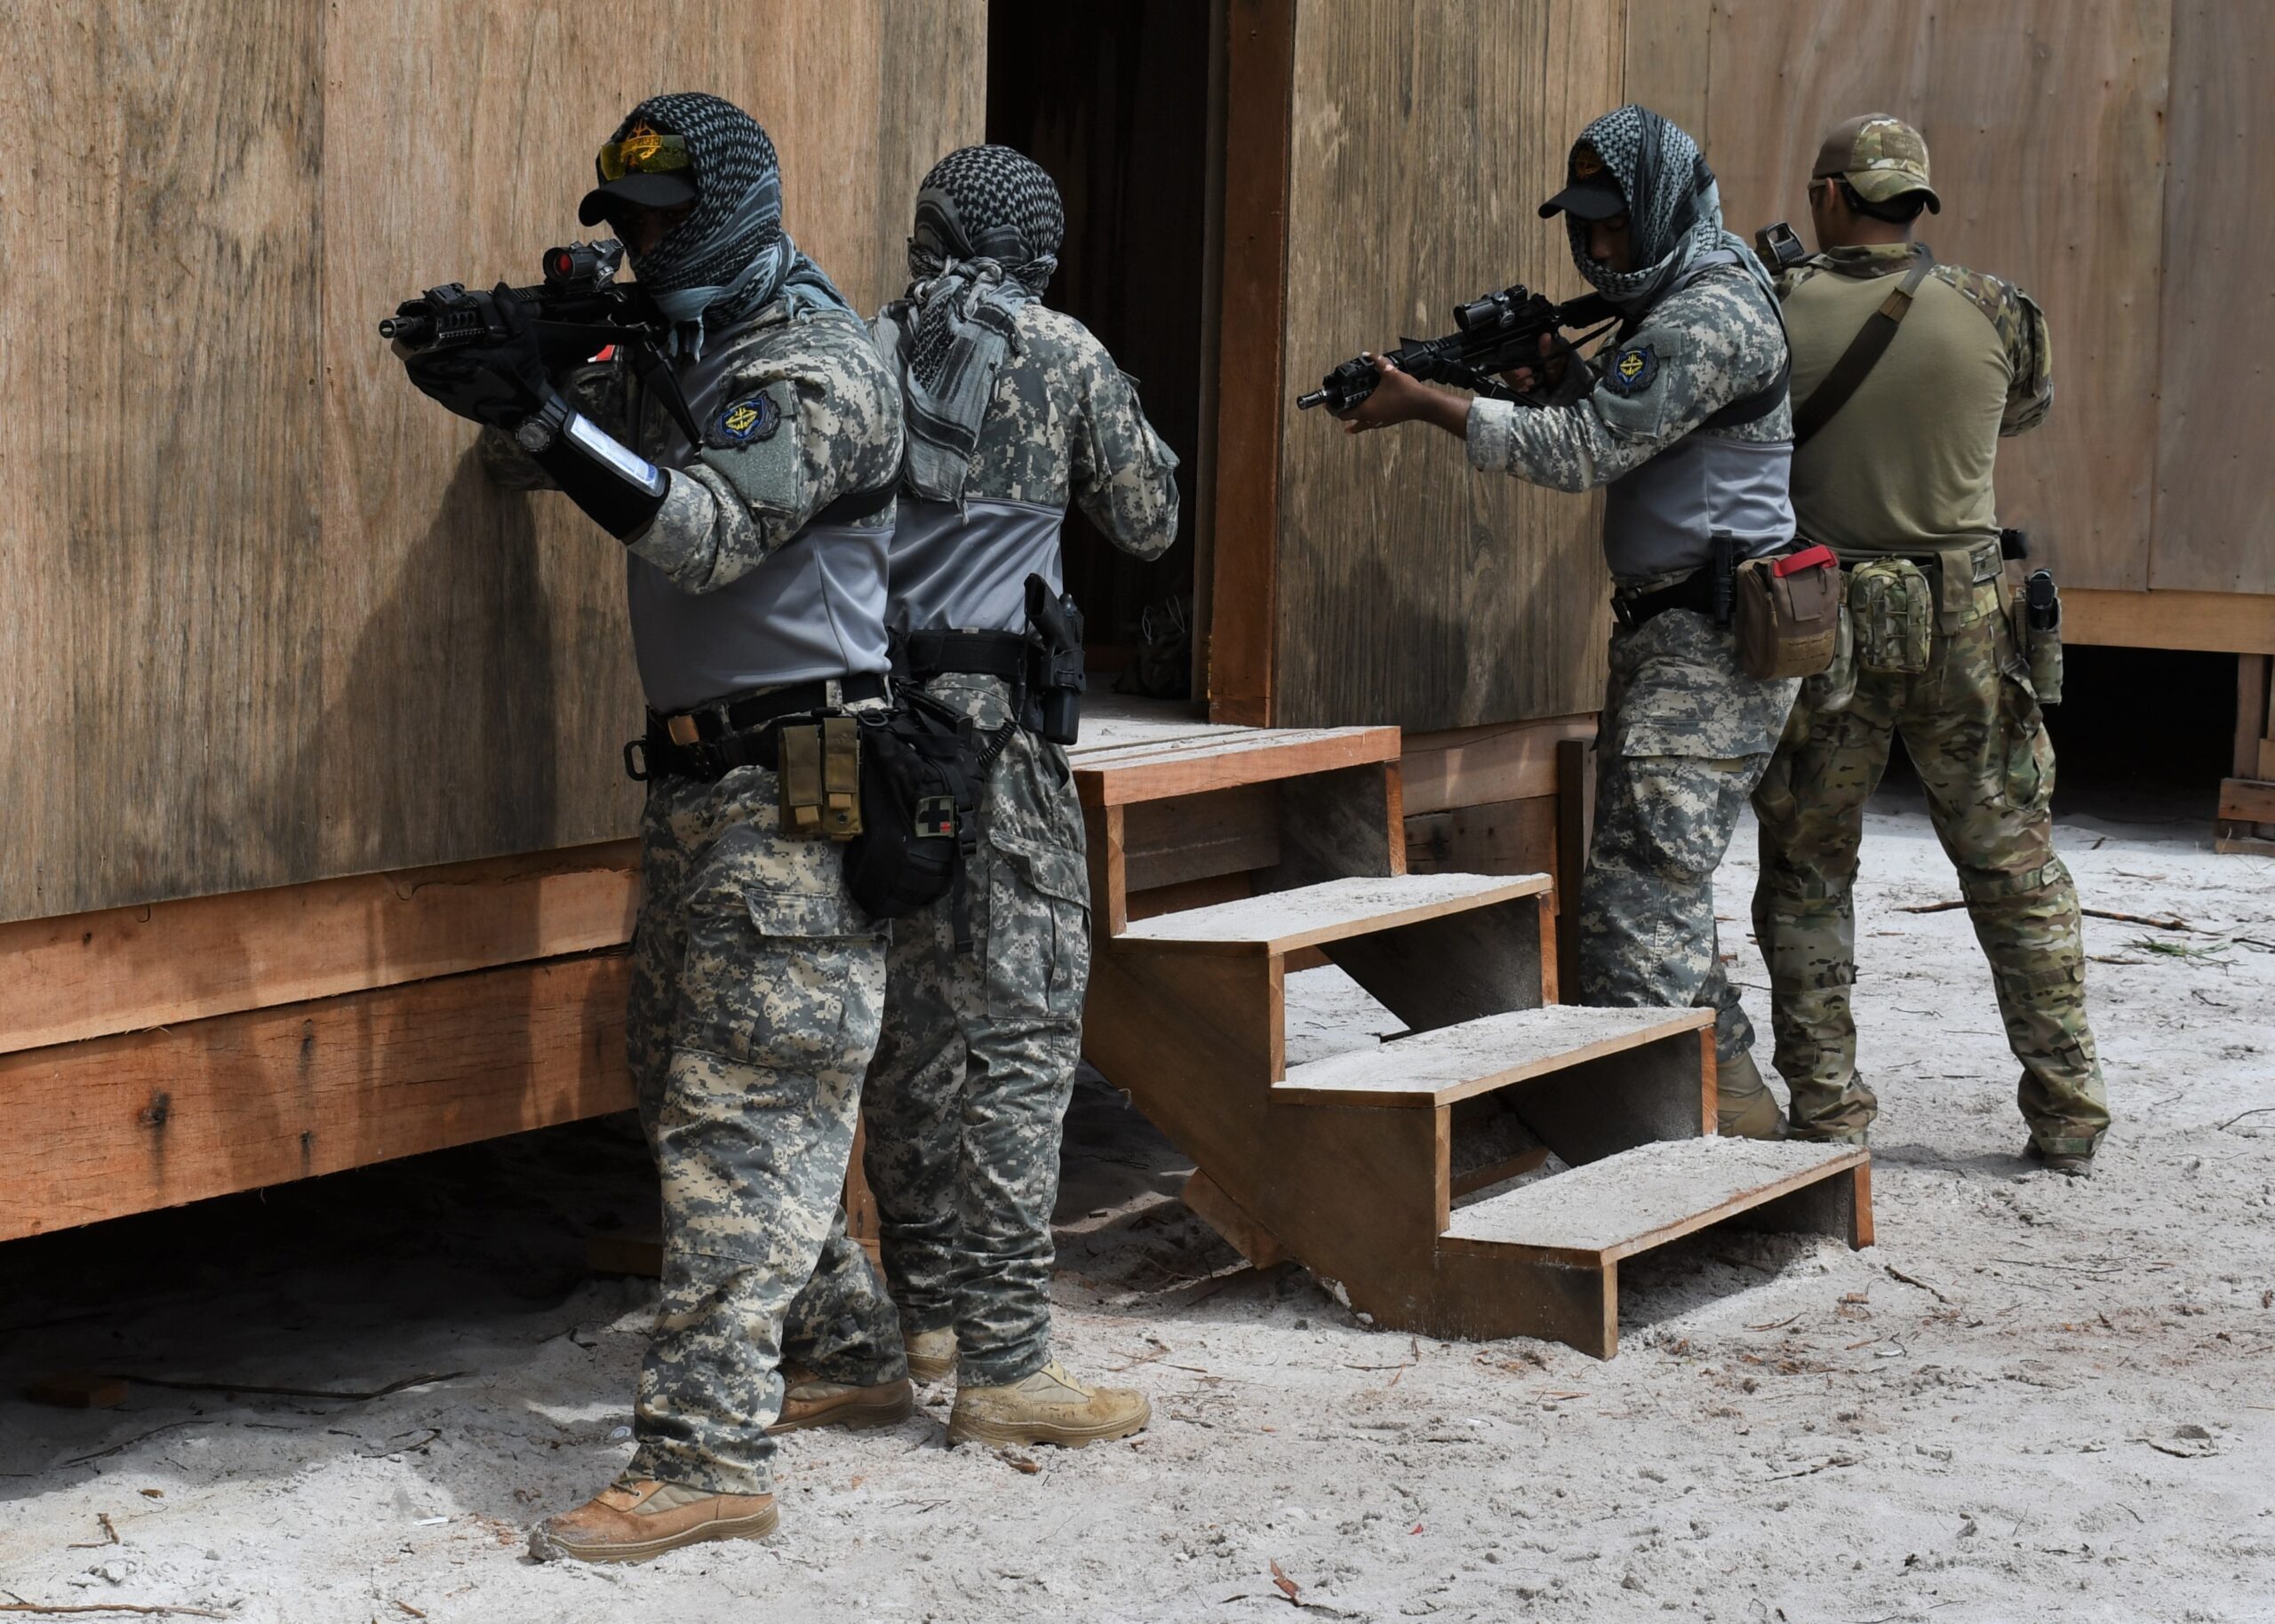 Members of the Dominican Republic Special Operations Force train with a member of the 54th Security Force Assistance Brigade, Florida National Guard, as part of an exercise in close quarters battle during Tradewinds, June 16, 2021 at Timehri. (U.S. Navy photo by Lt. Elizabeth Allen/Released)